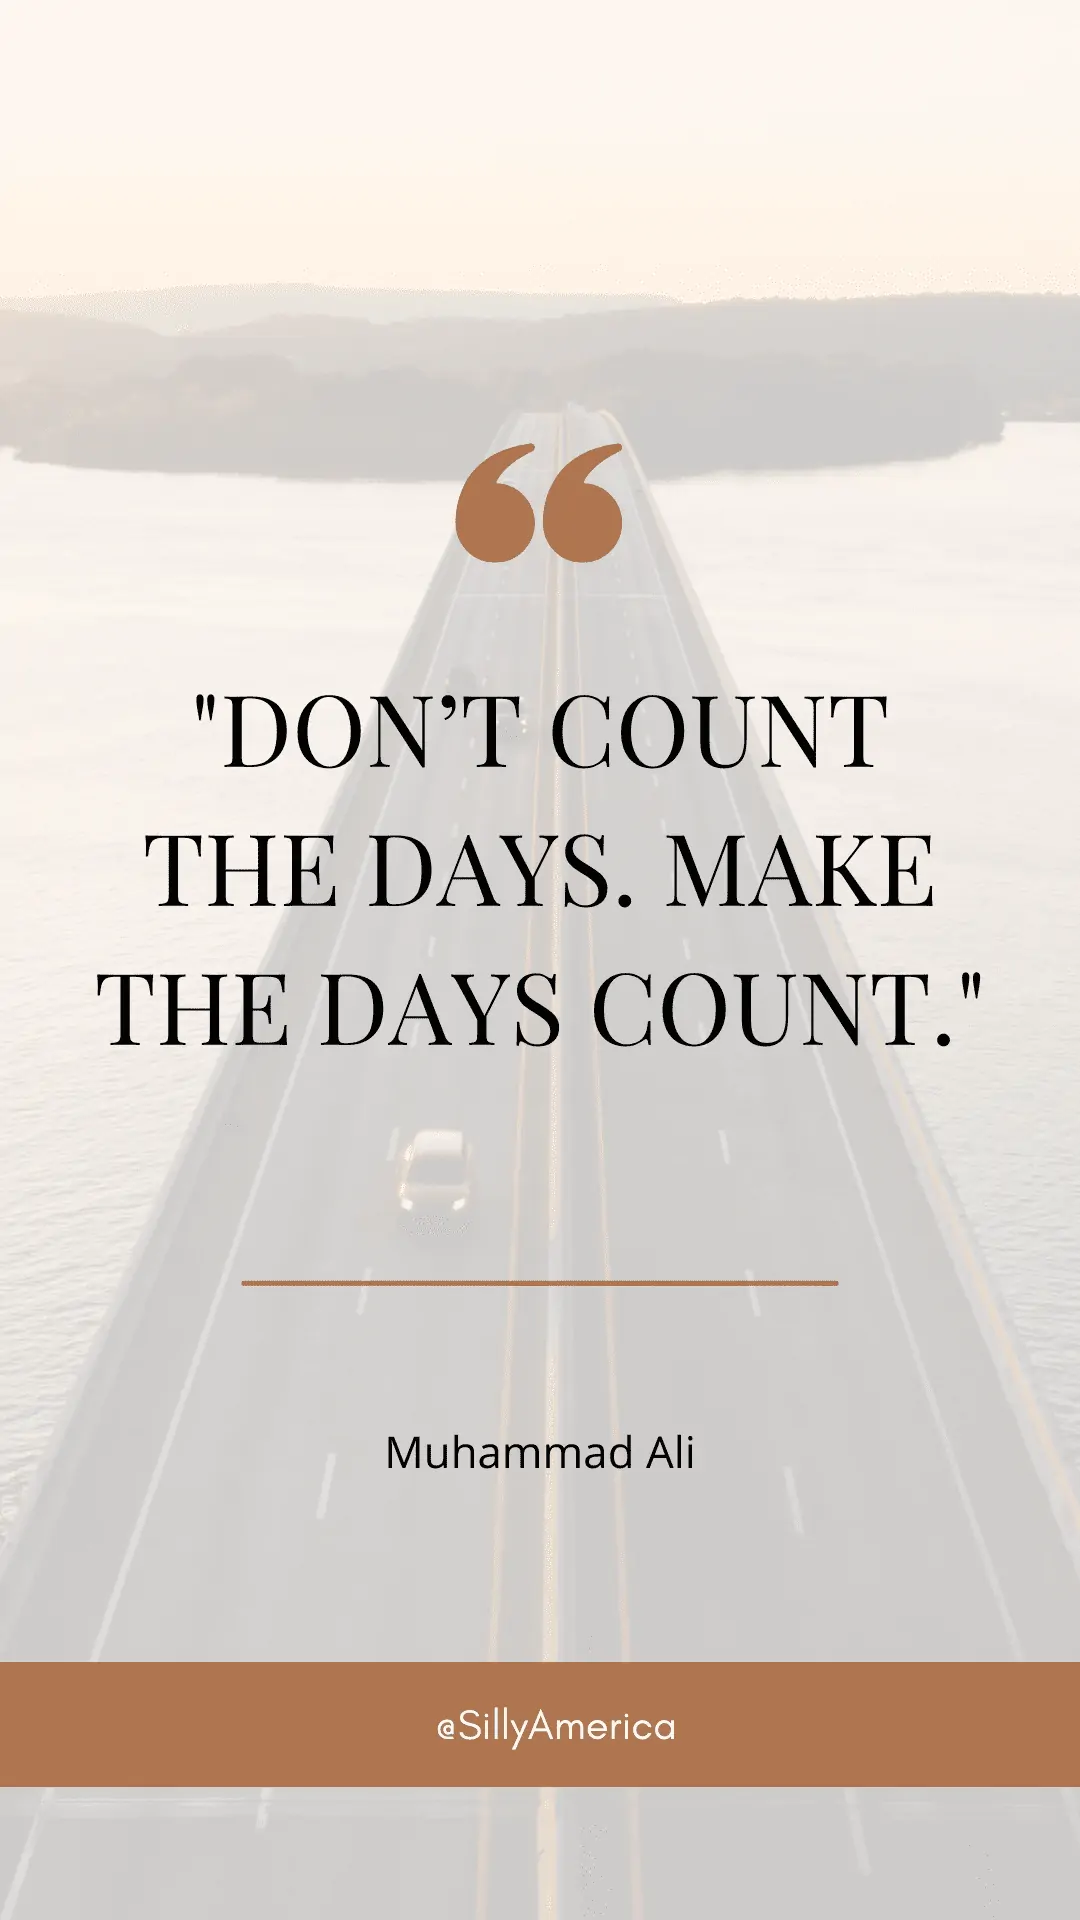 “Don’t Count The Days. Make The Days Count.” Muhammad Ali - ROAD TRIP QUOTES